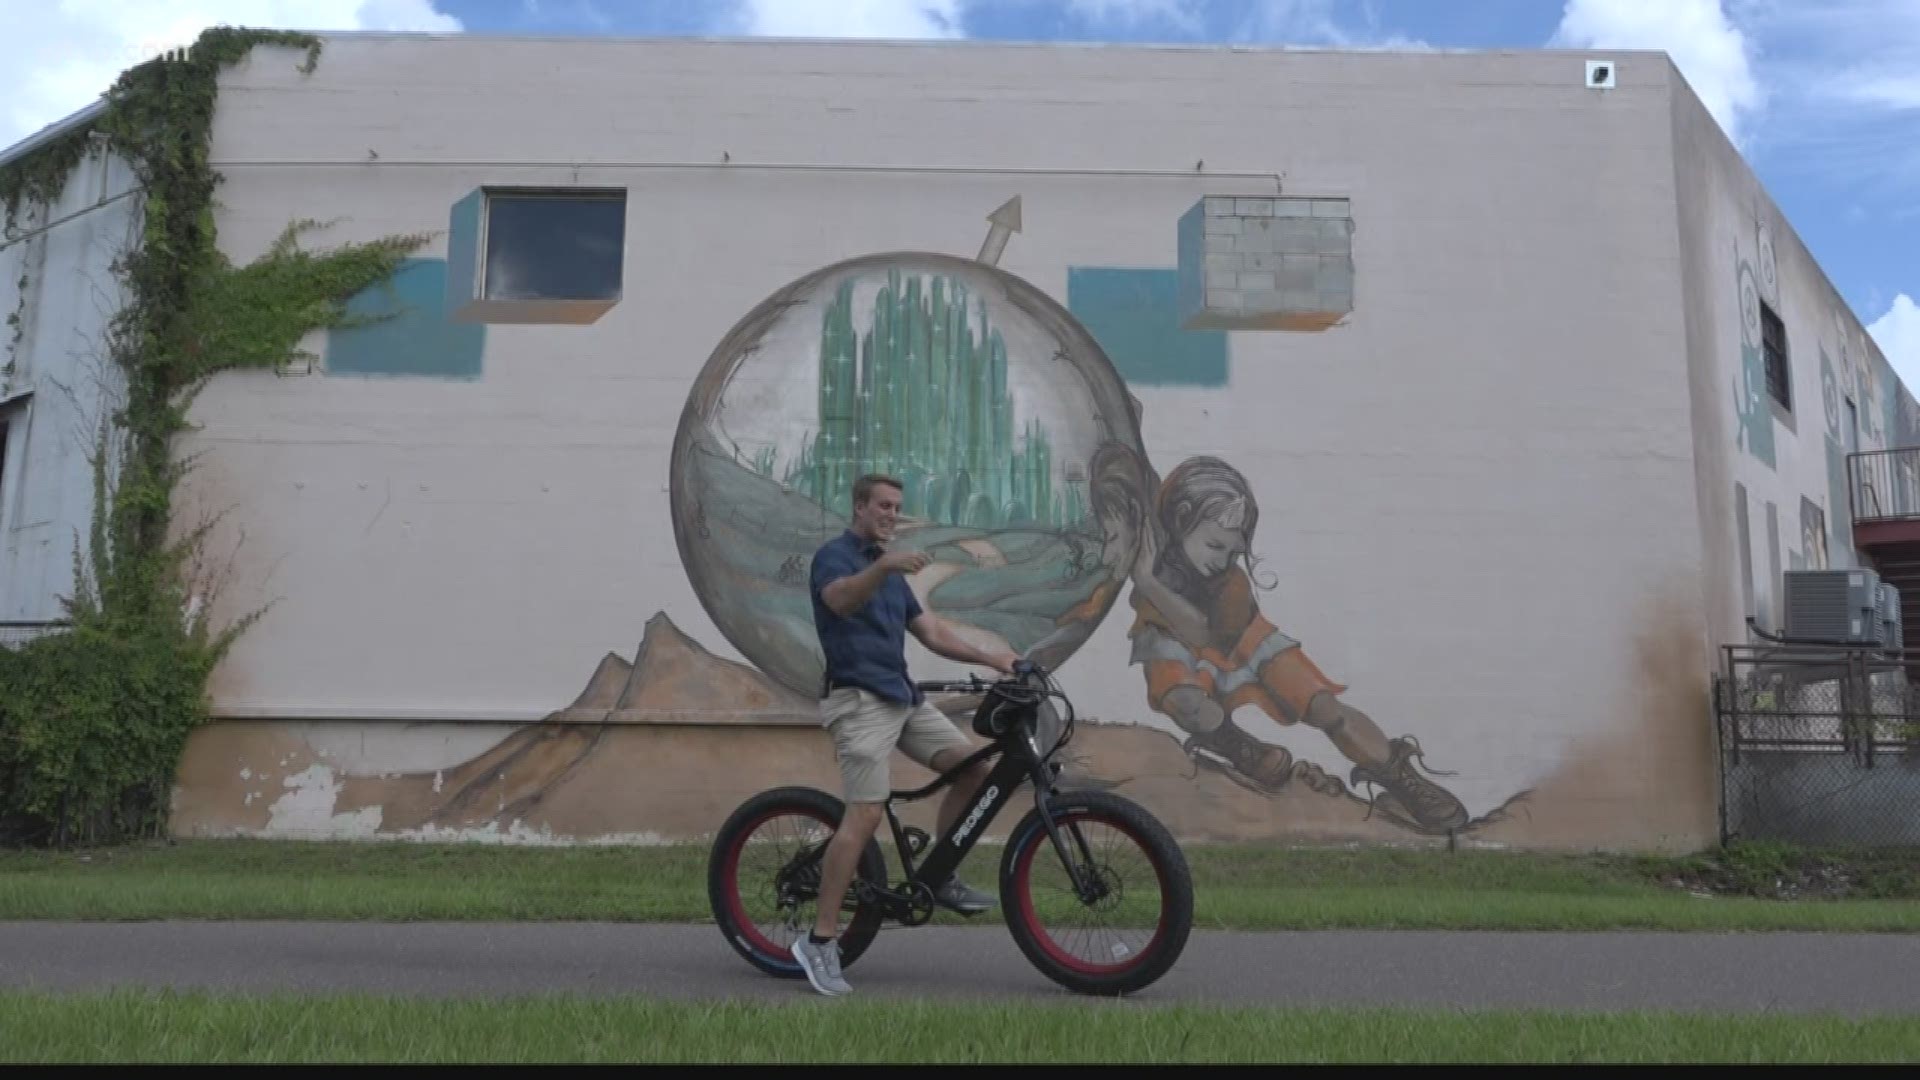 A new bike tour is looking to make that outdoor artwork a little more accessible.